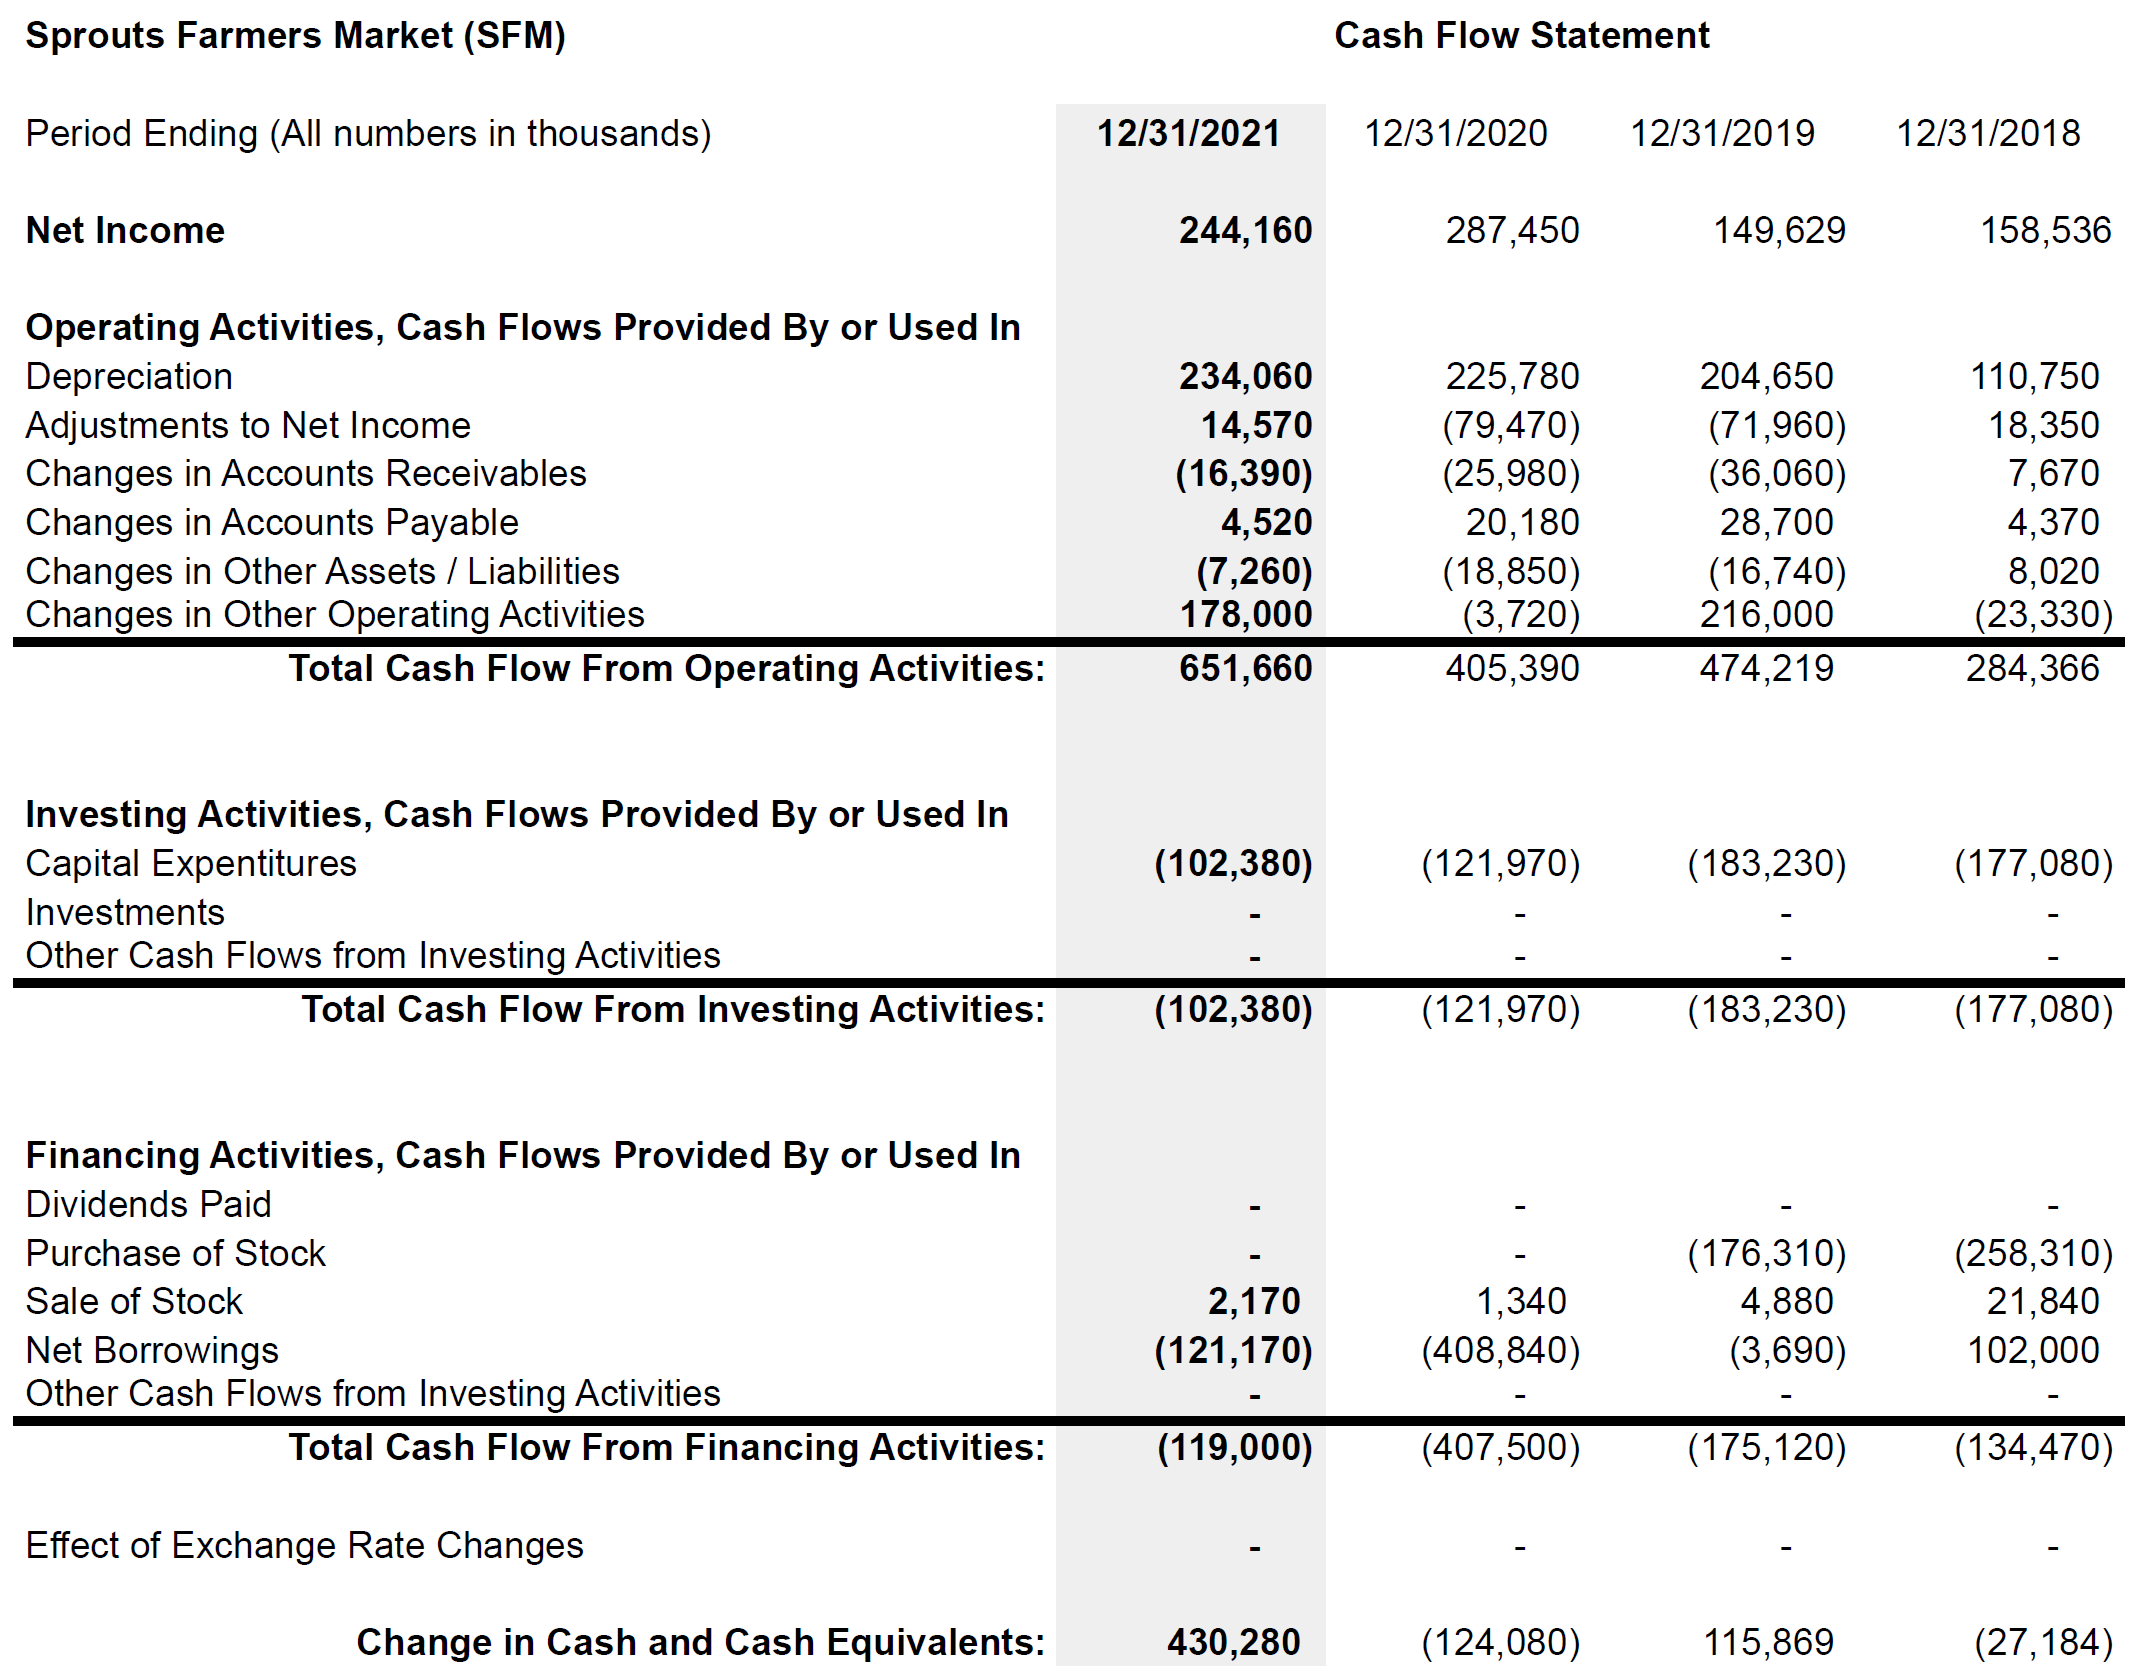 Sprouts Cash Flow Statement as of December 31, 2021